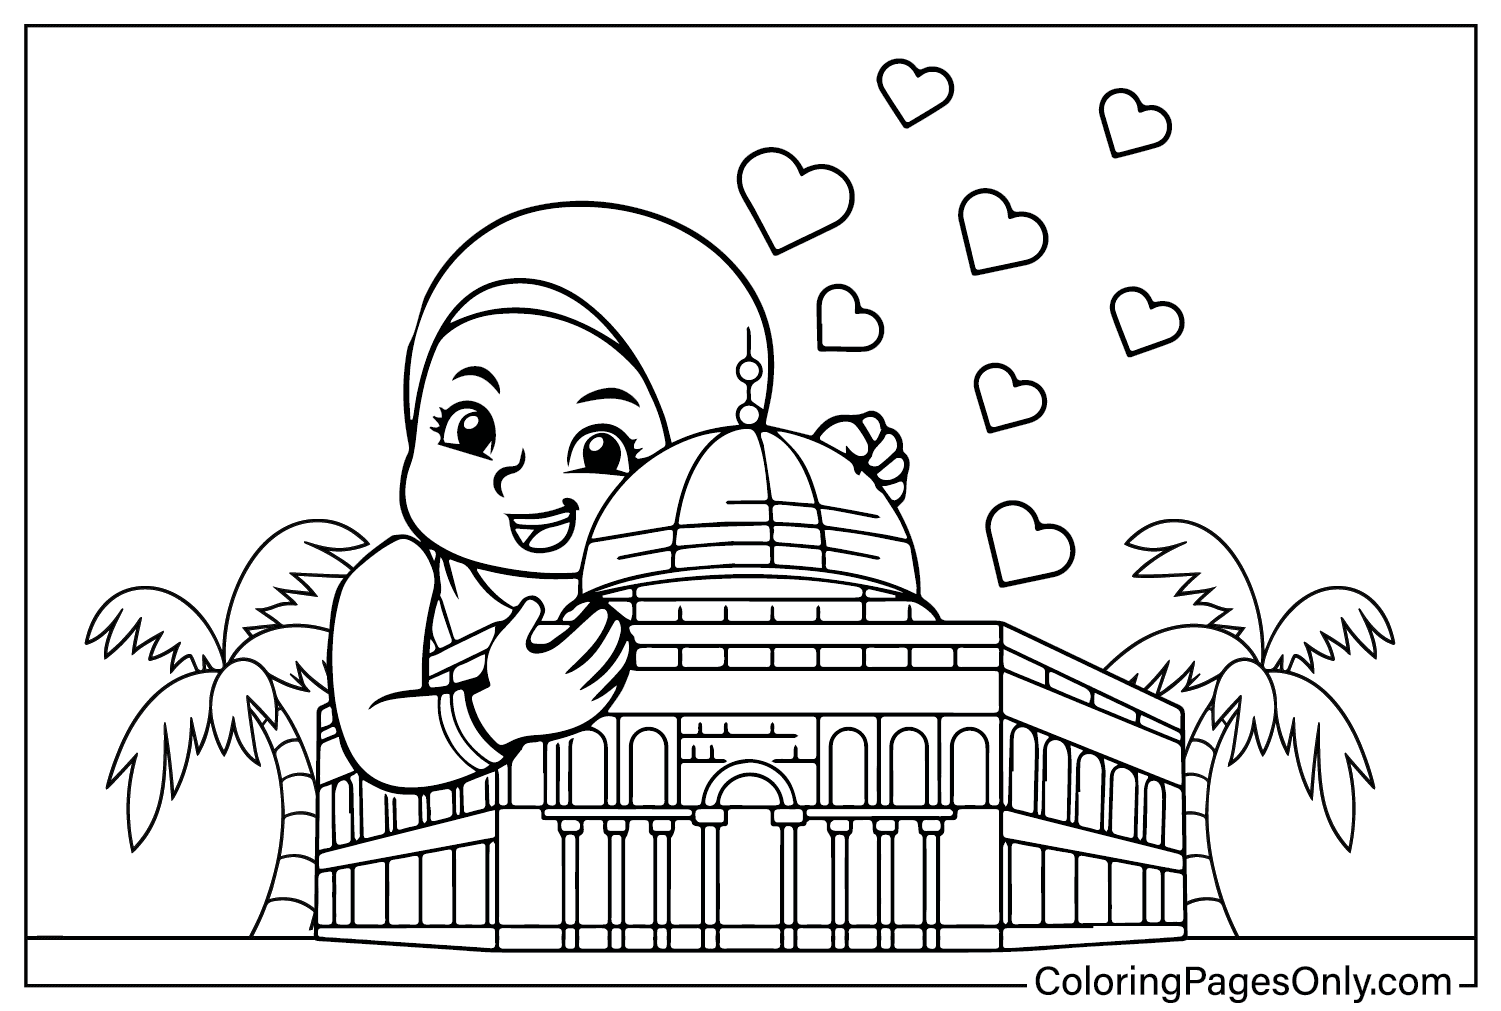 Palestine Coloring Page Free from Palestine